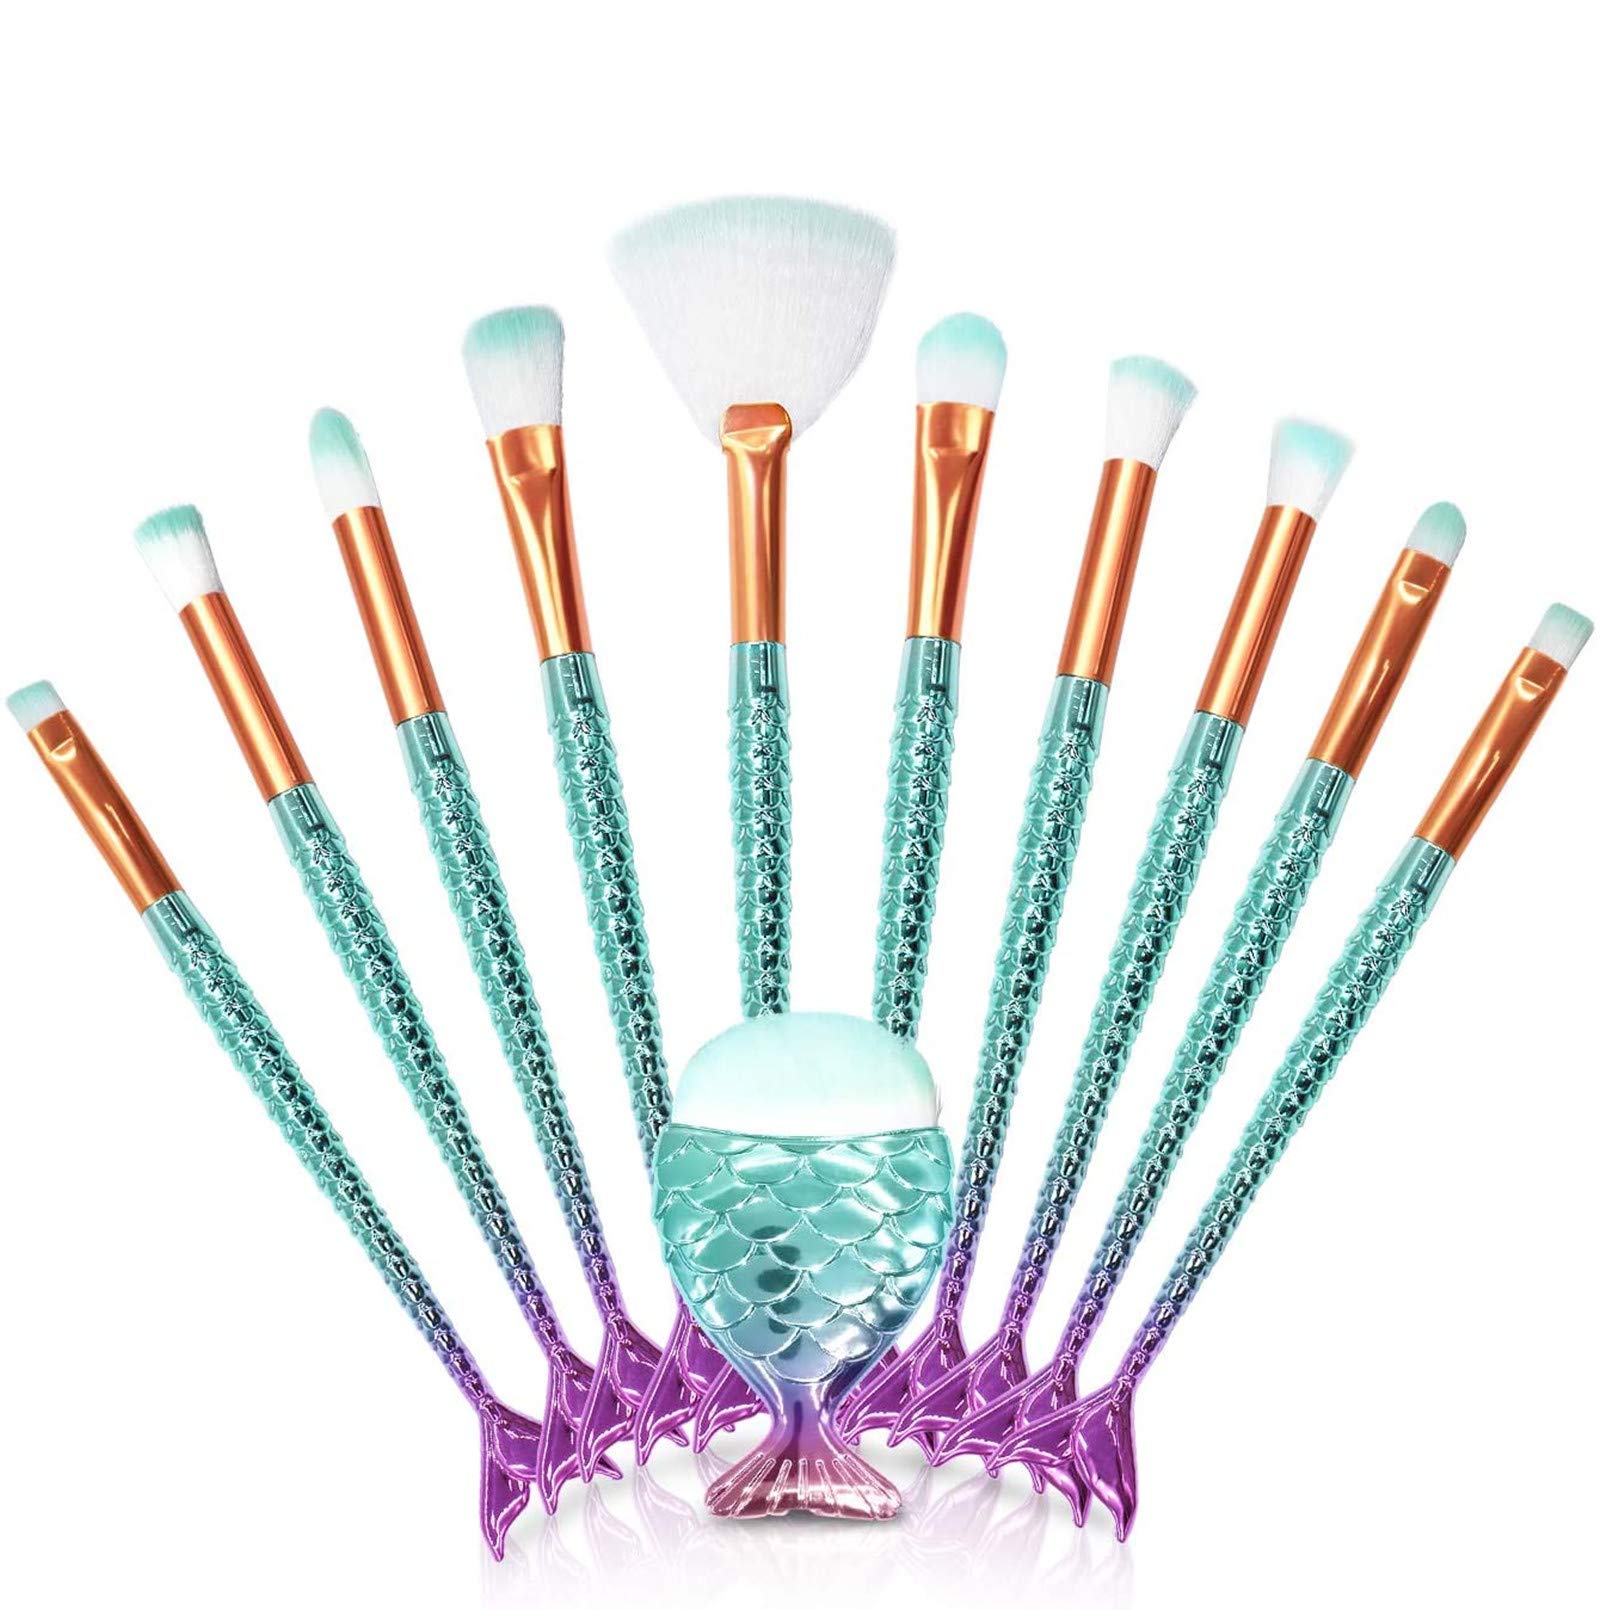 Book Cover 11PCS Fish Tail Makeup Brushes Set, Foundation Eyebrow Eyeliner Blush Cosmetic Concealer Brushes Women Girl Cute Make Up Tool Set (Colorful Mermaid Handle)